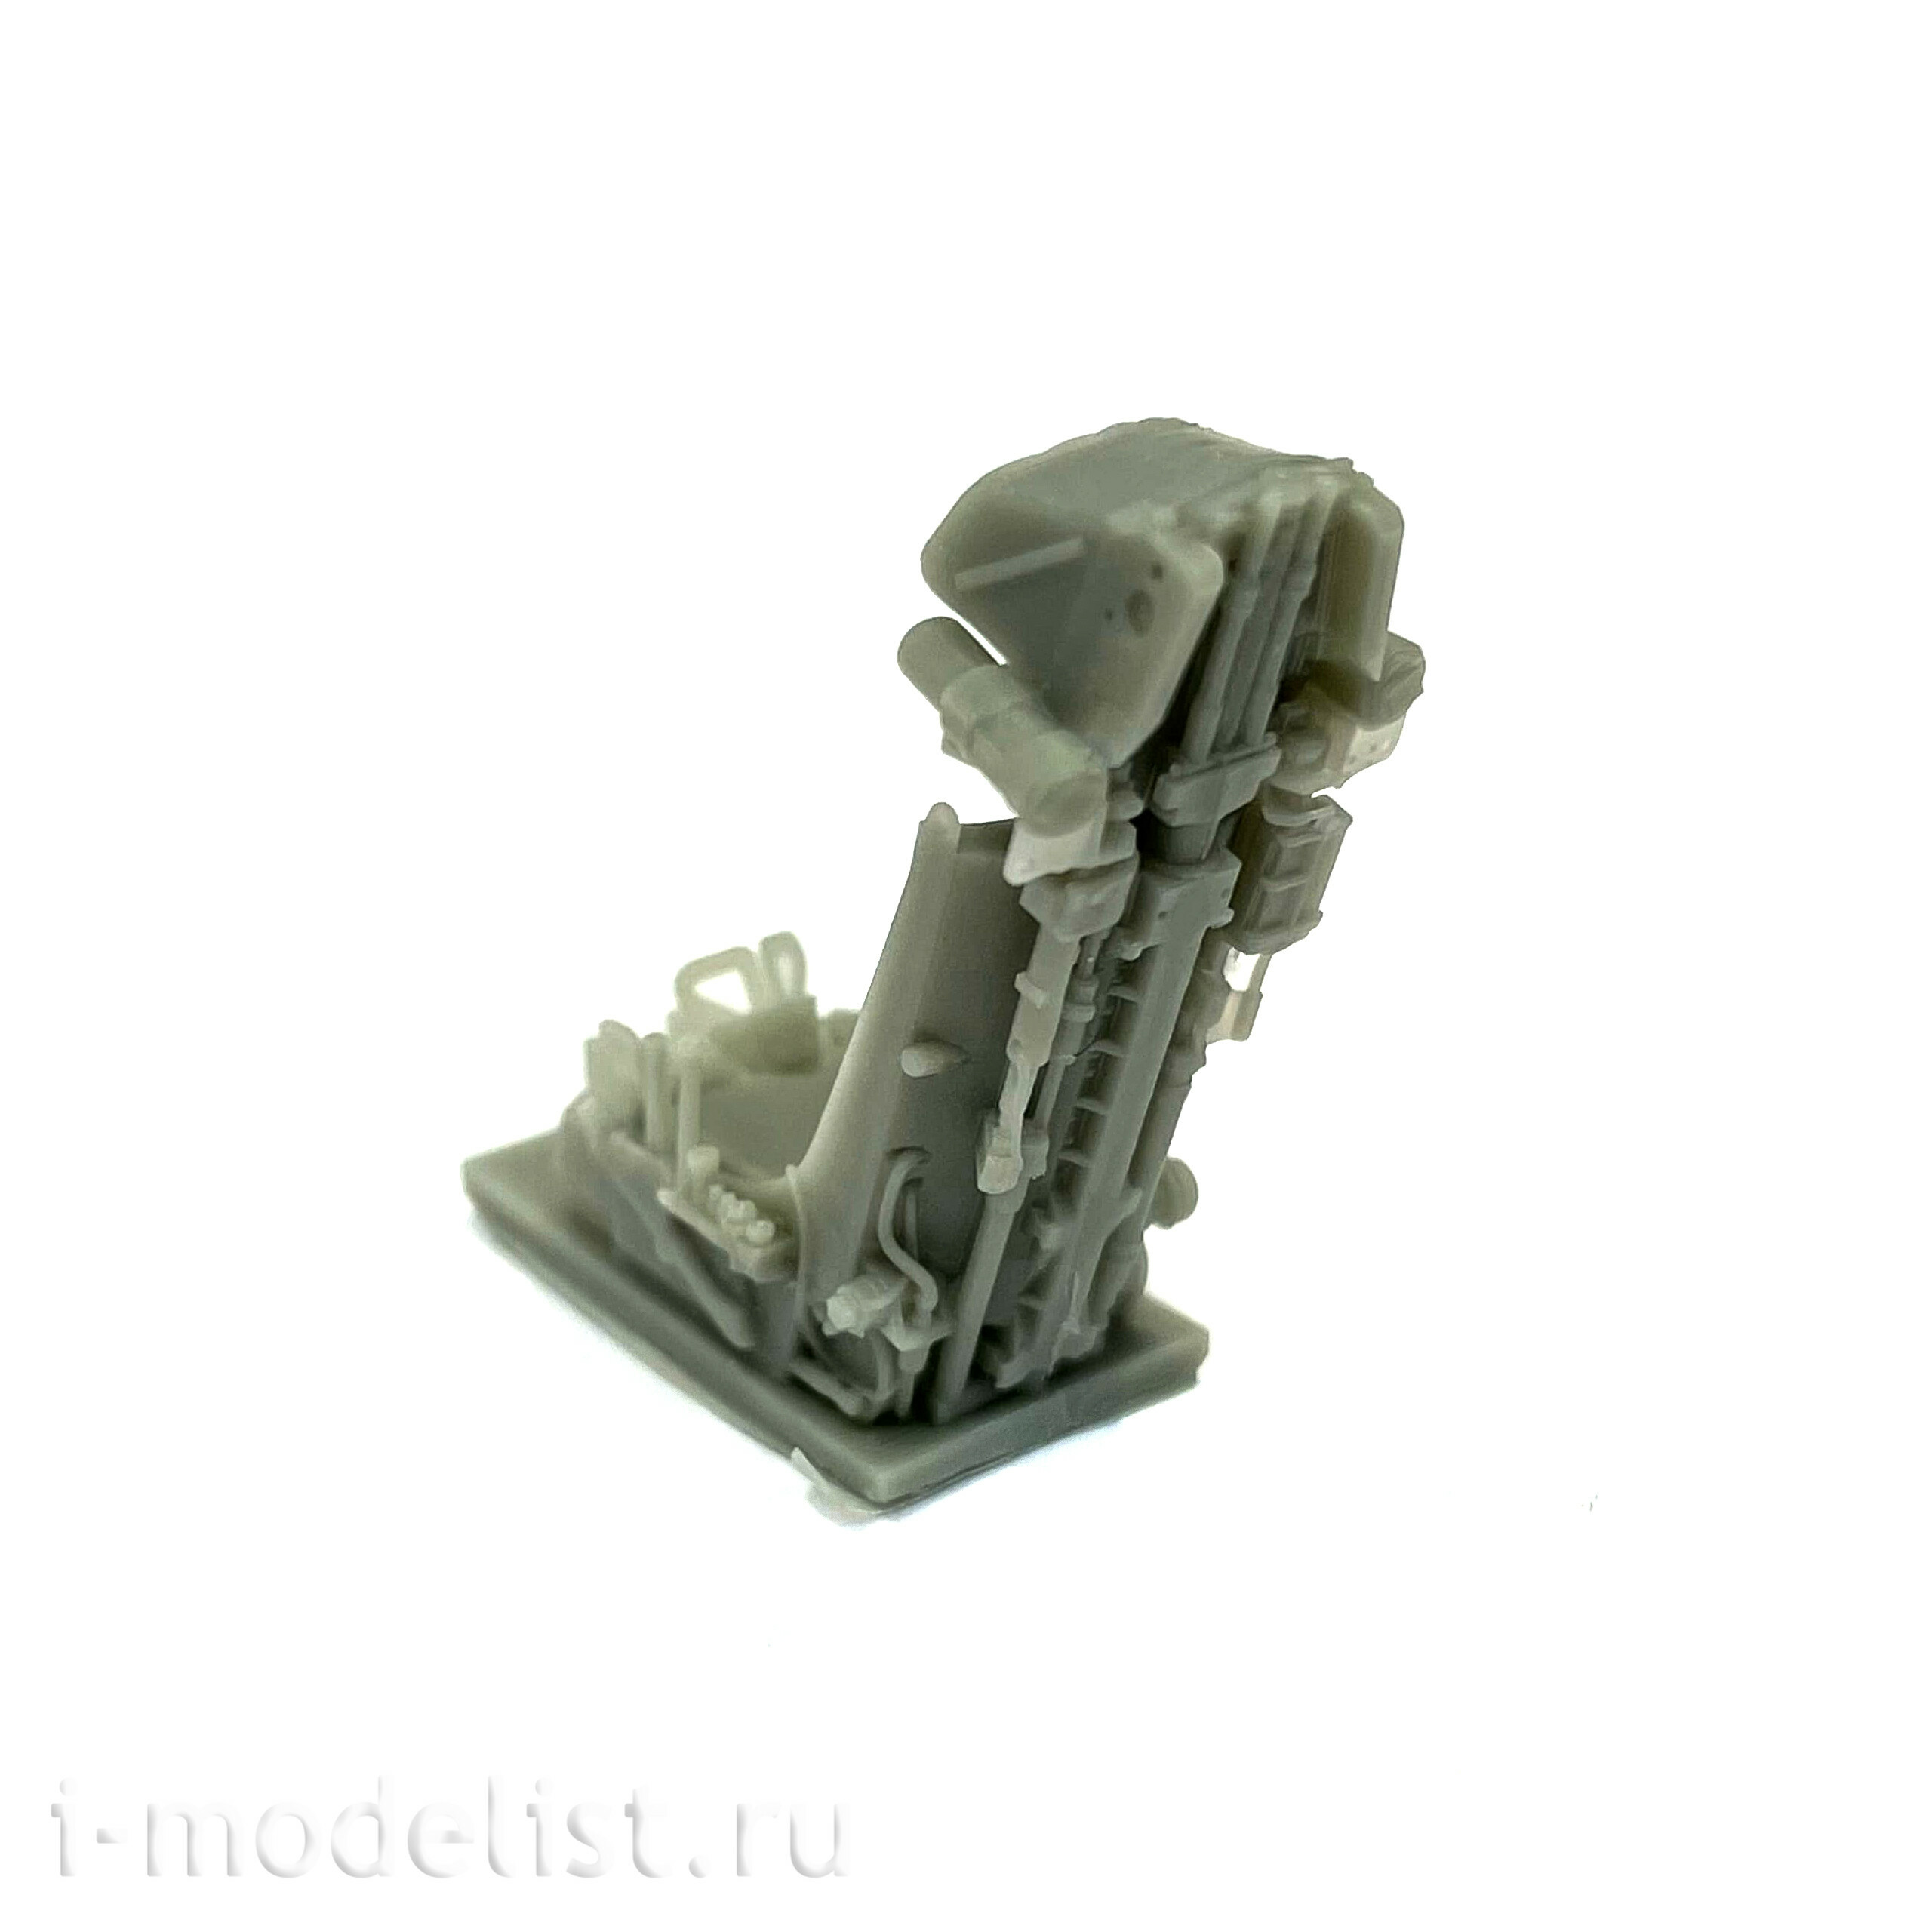 RS48020 E.V.M. 1/48Highly detailed resin chair K-36L for the Soviet Su-25 attack aircraft model of the Zvezda company with photo etching straps.